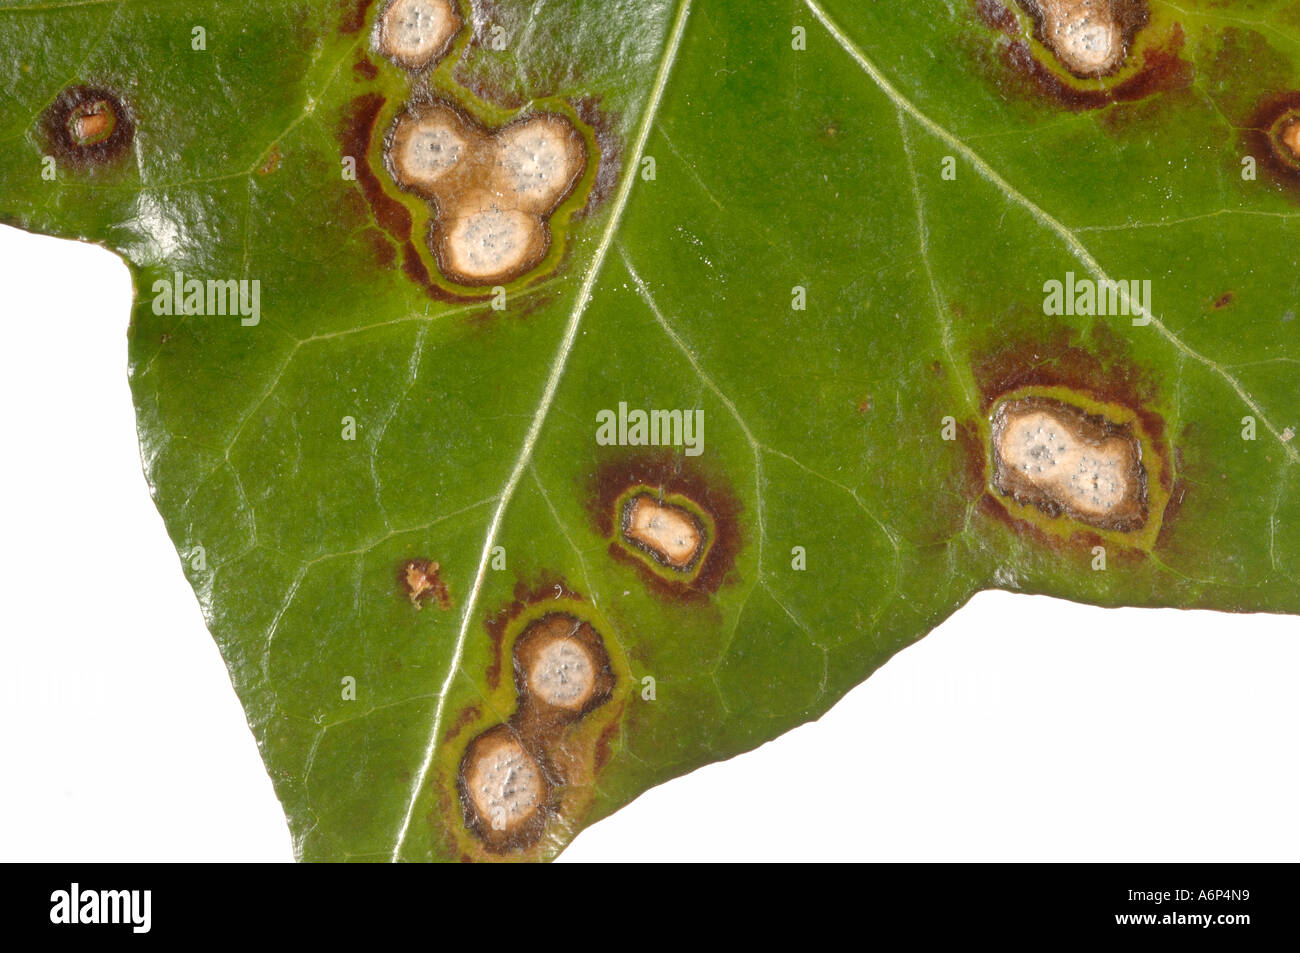 Leaf spot on ivy Hedera helix with pycnidia many possible fungal causes Stock Photo